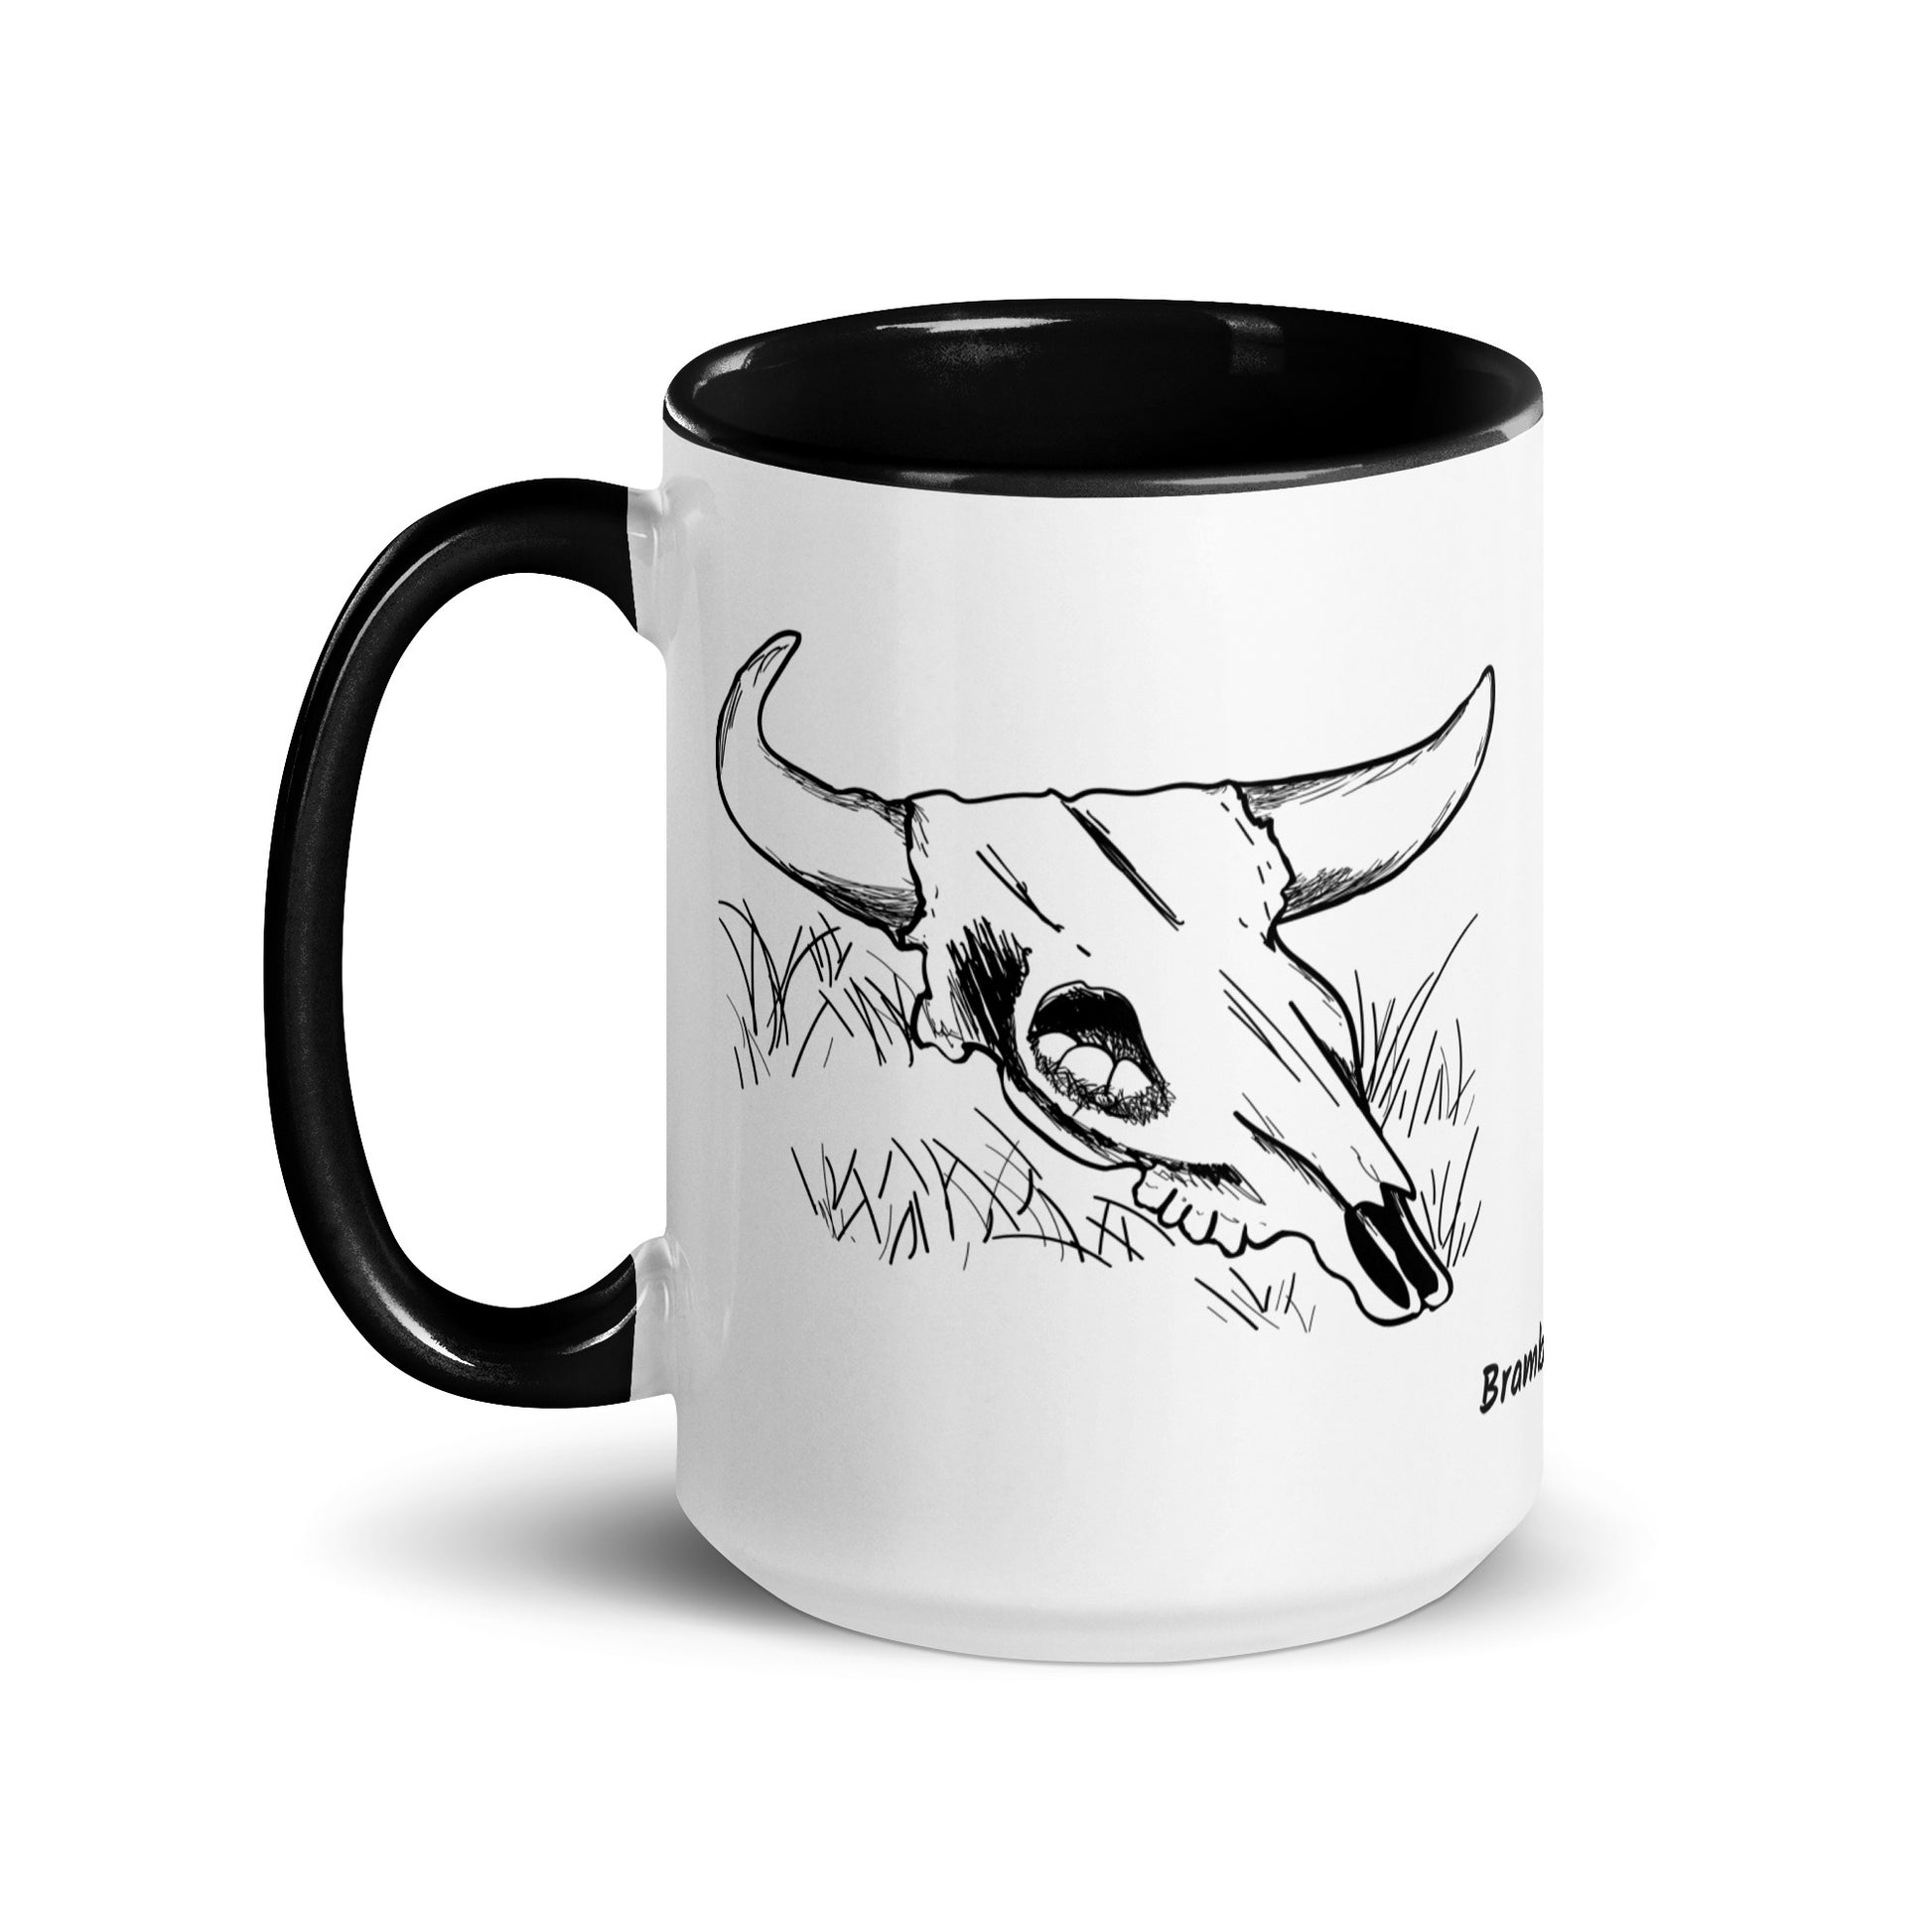 15 ounce ceramic mug. White with black handle and inside. Features double sided image of a cow skull cradling a bird nest.